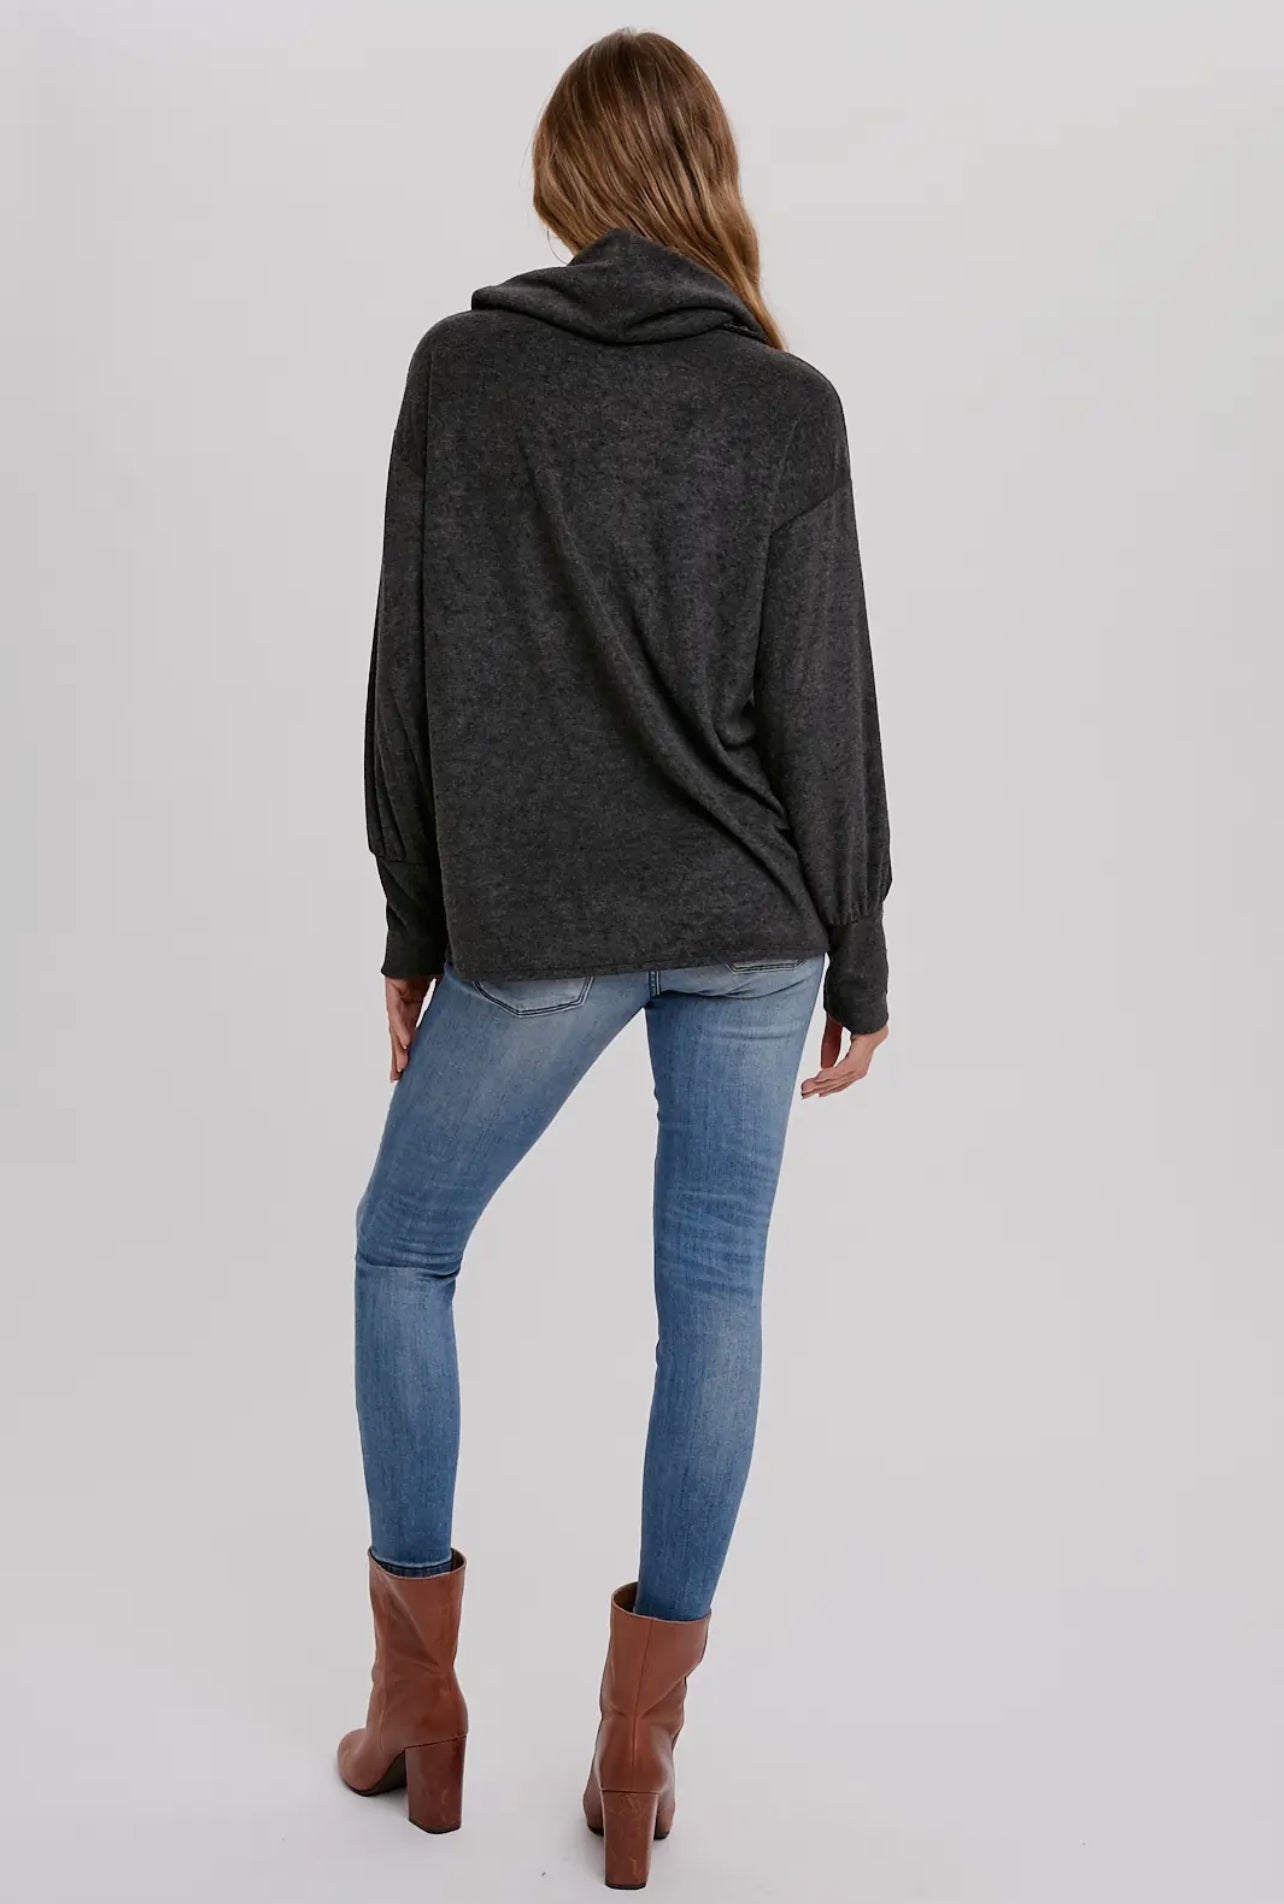 Terry Cowl Neck Pullover